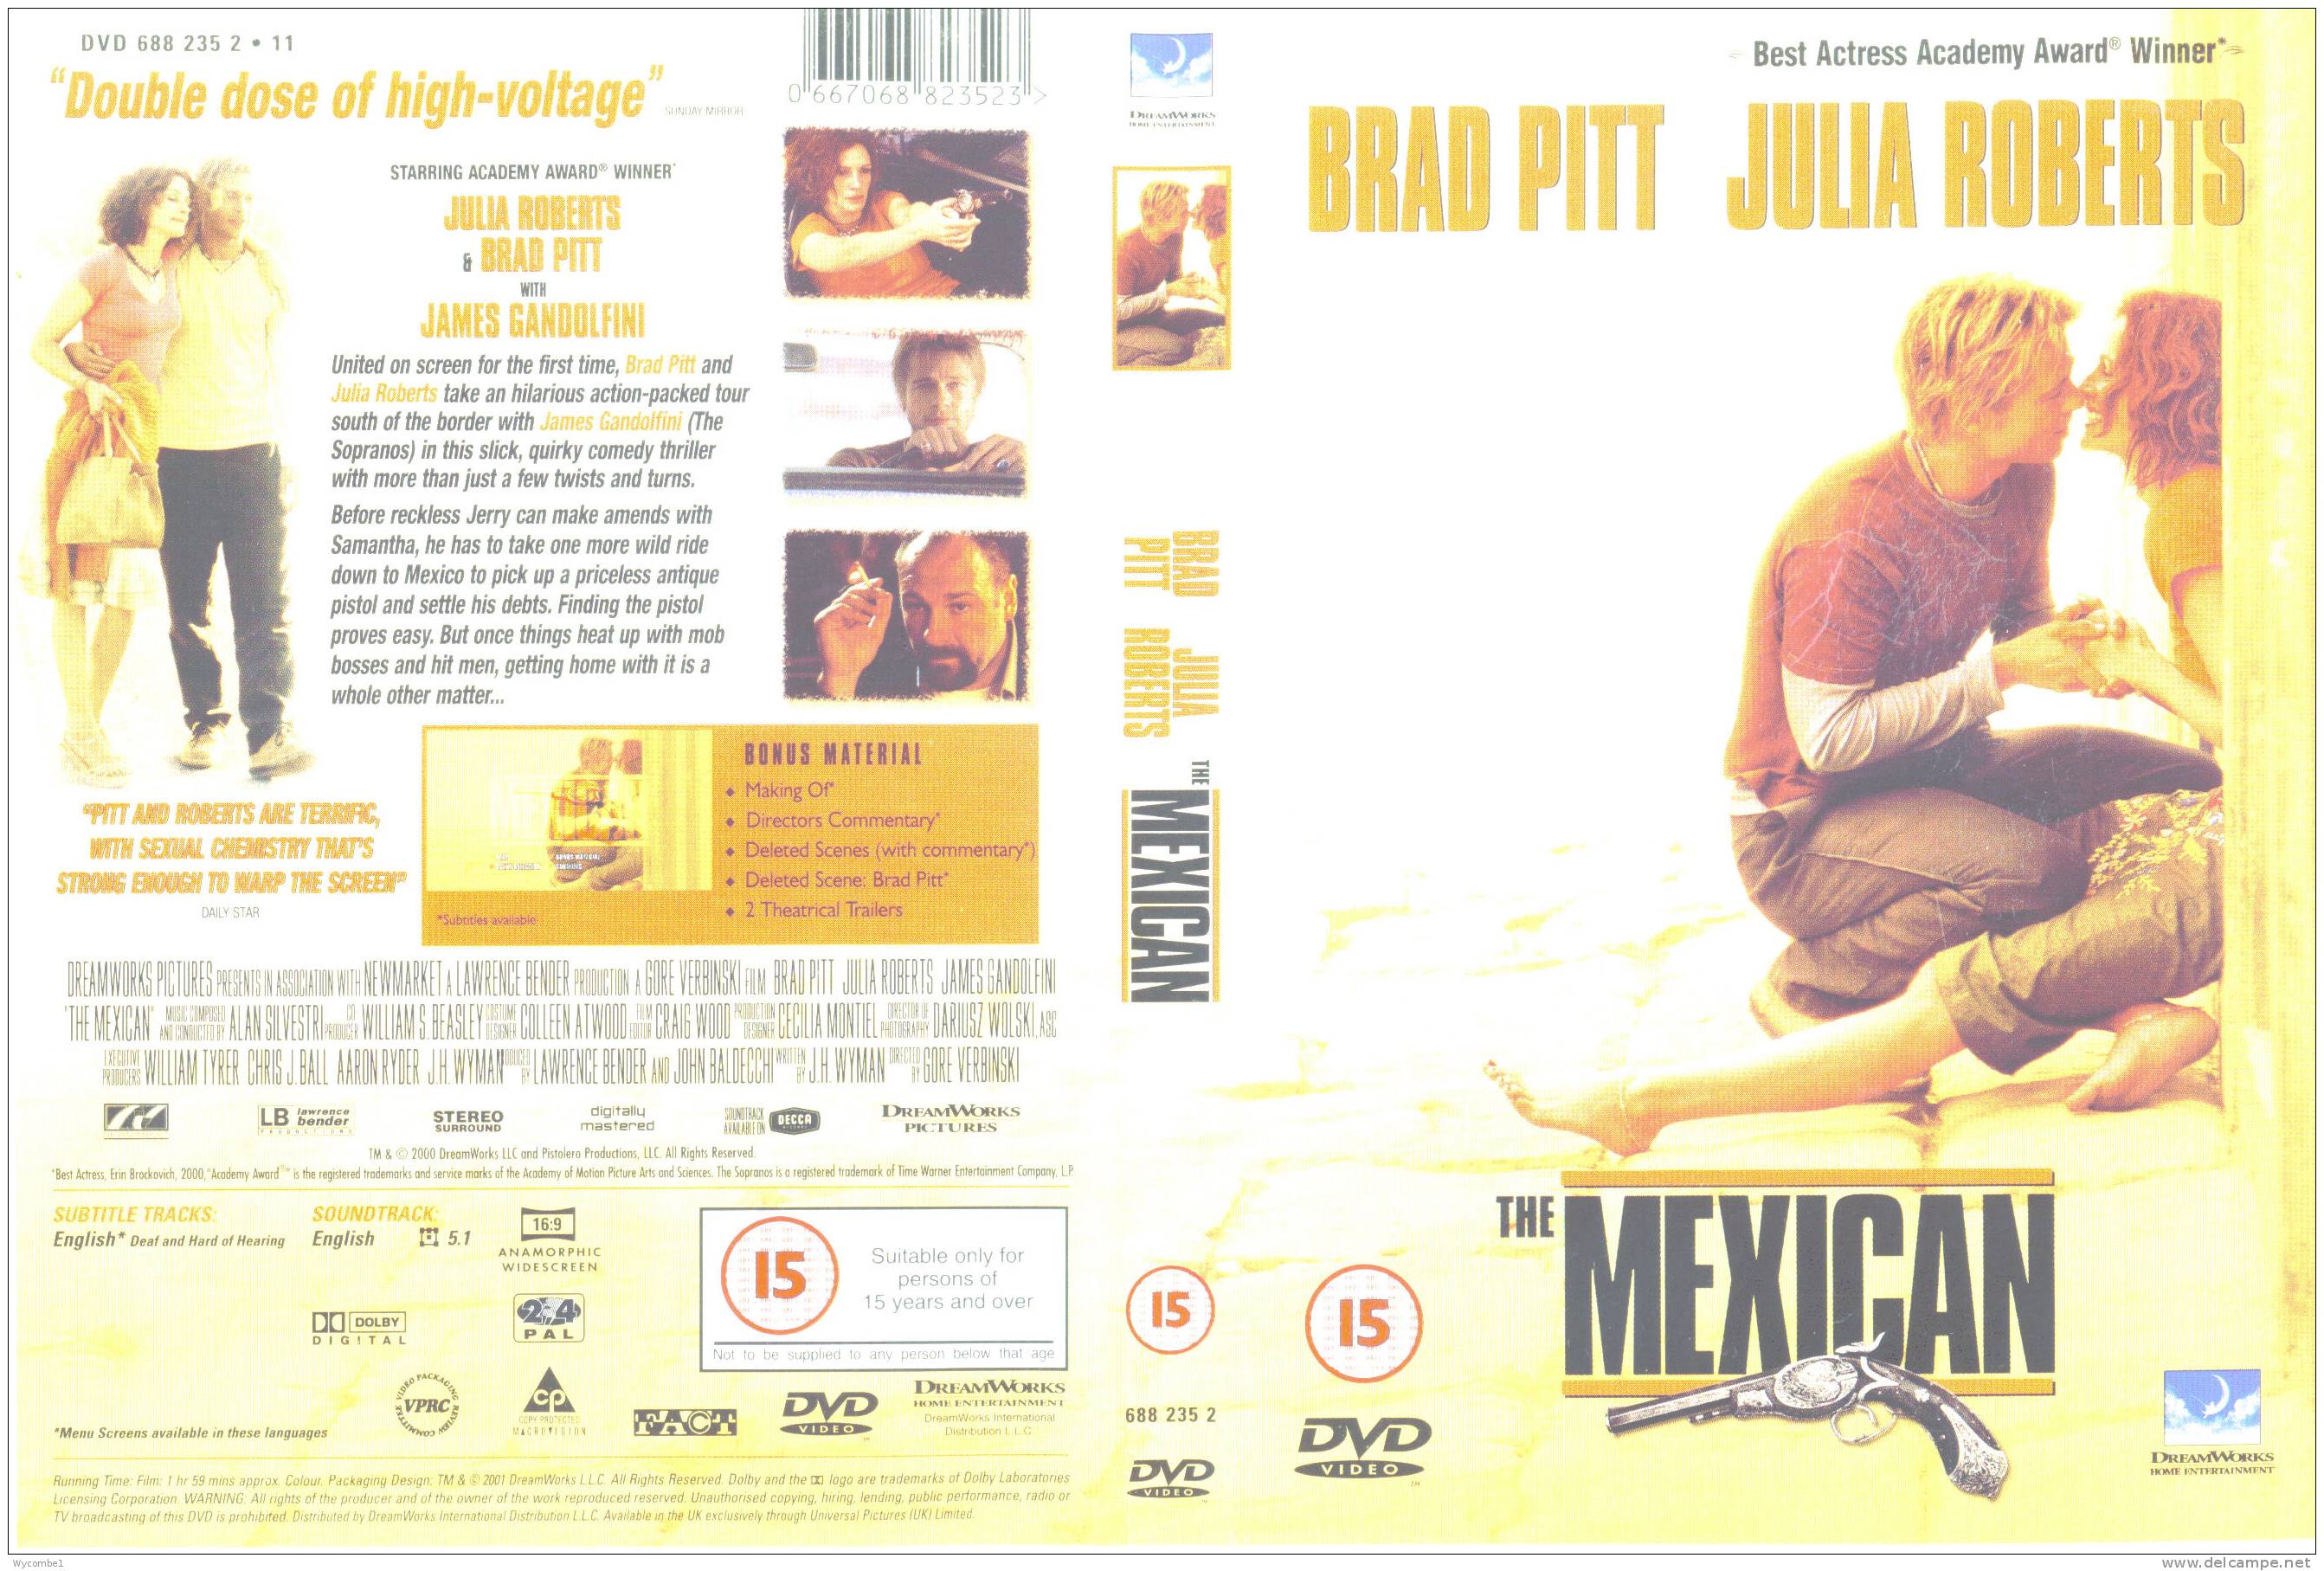 THE MEXICAN - Brad Pitt (Details In Scan) - Comedy